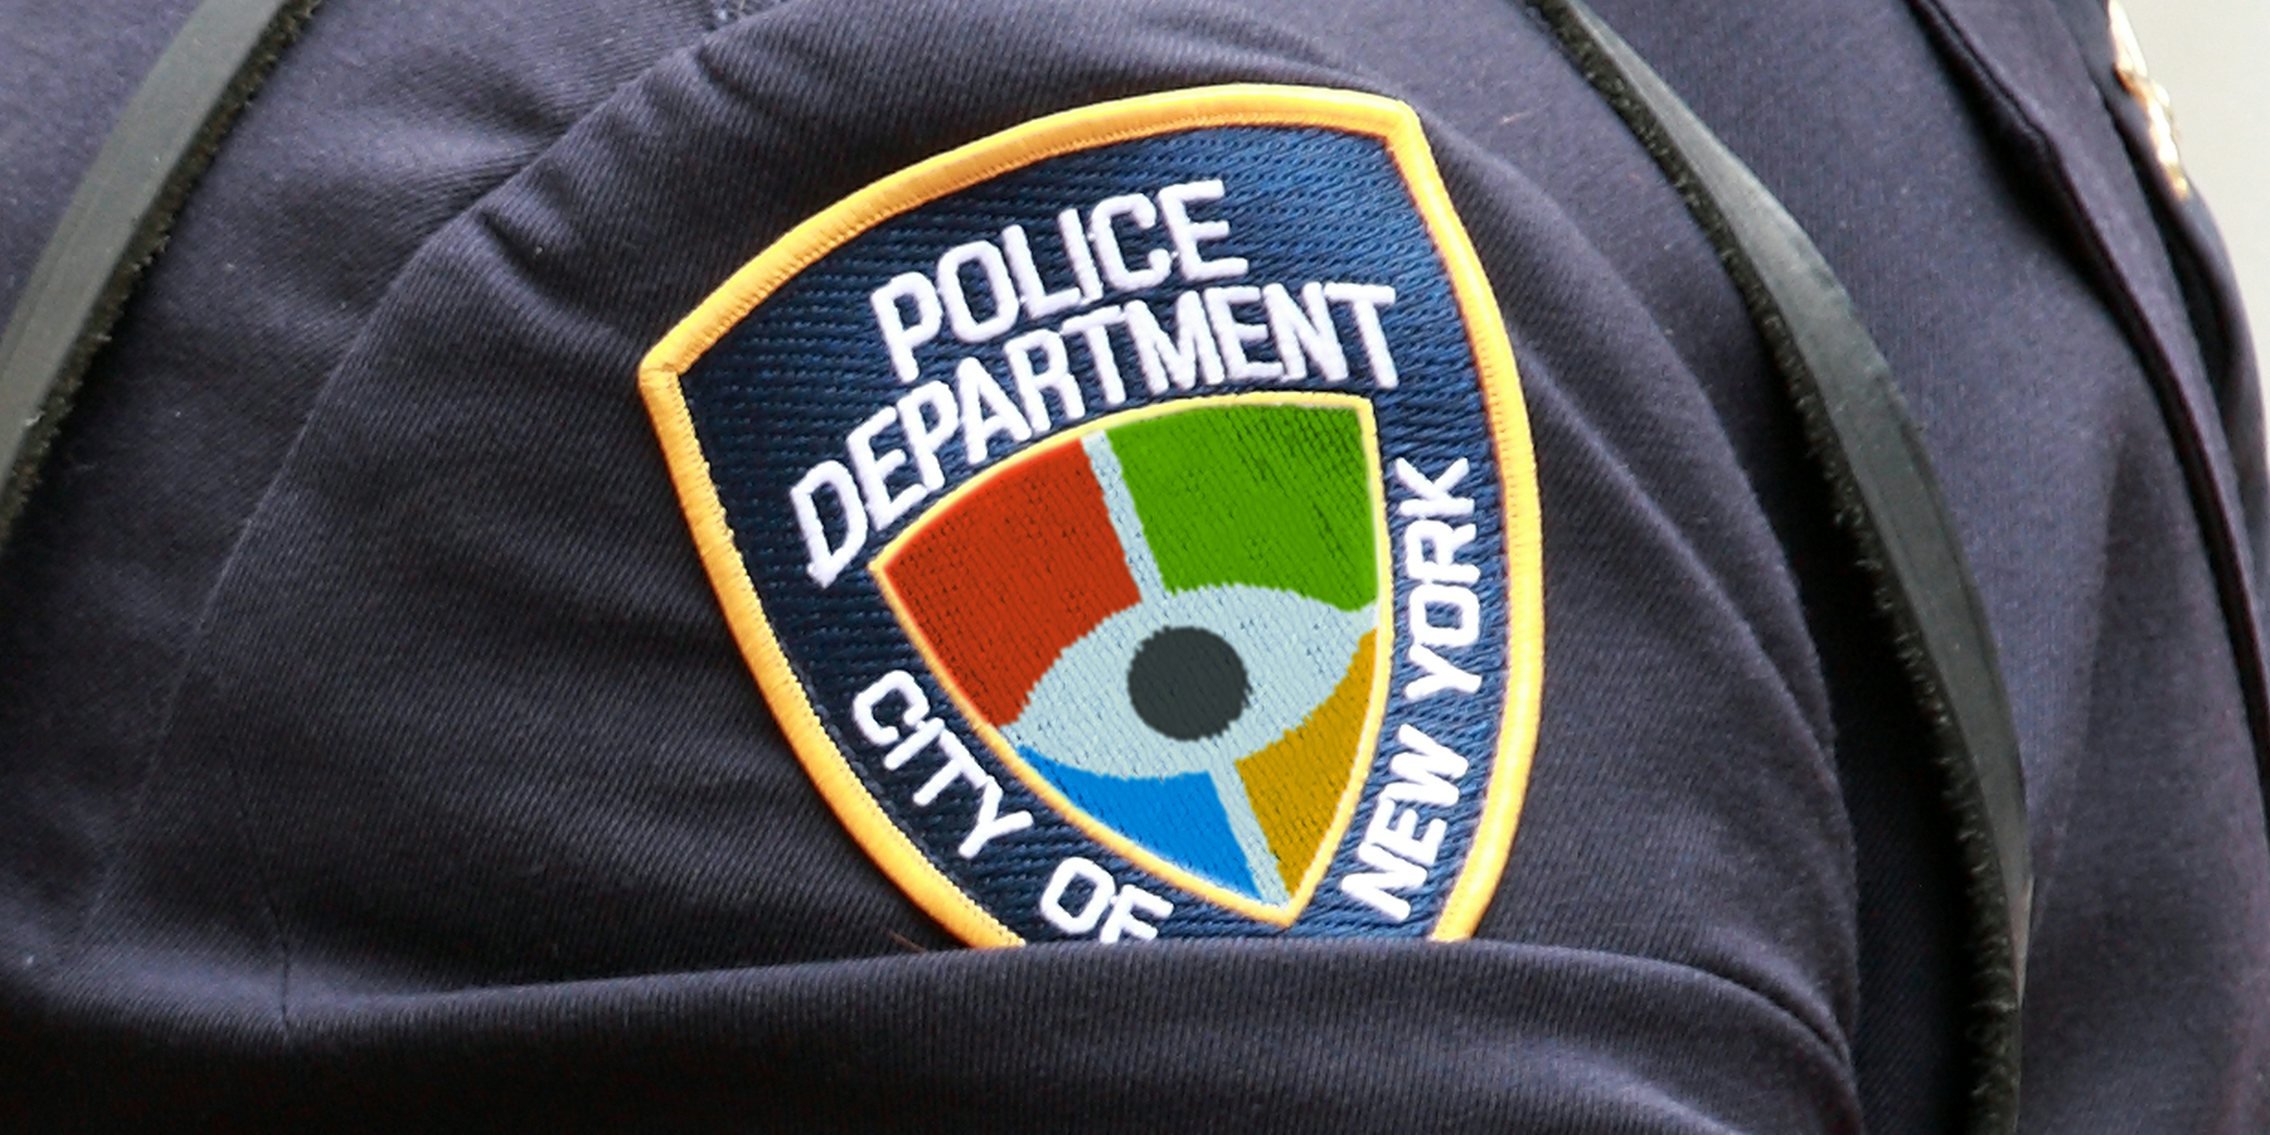 NYPD patch with Microsoft logo and open eye. Activists are calling on Microsoft to end its surveillance partnership with the NYPD.